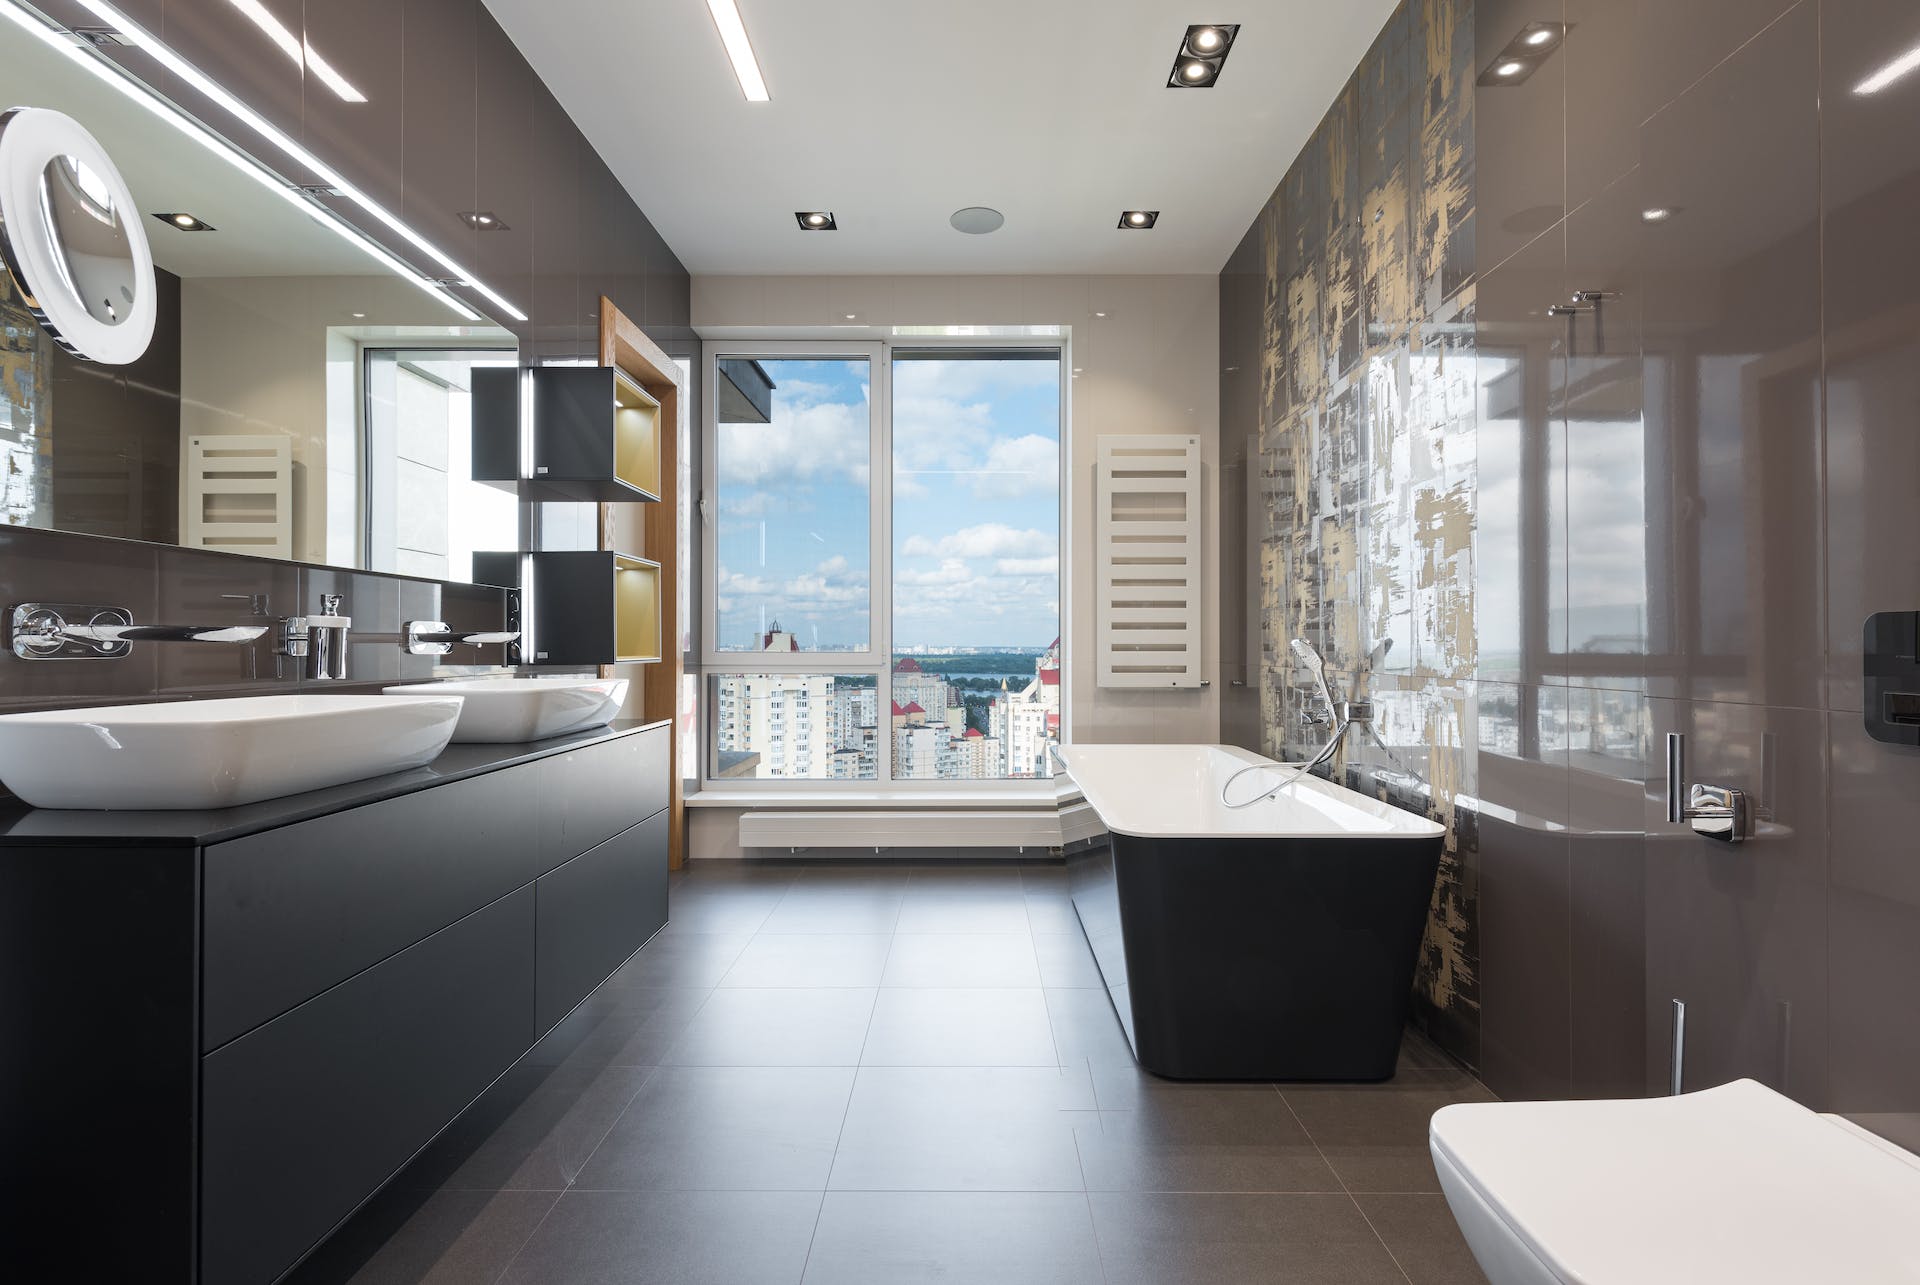 10 Master Bathroom Remodeling Ideas You Have to Try